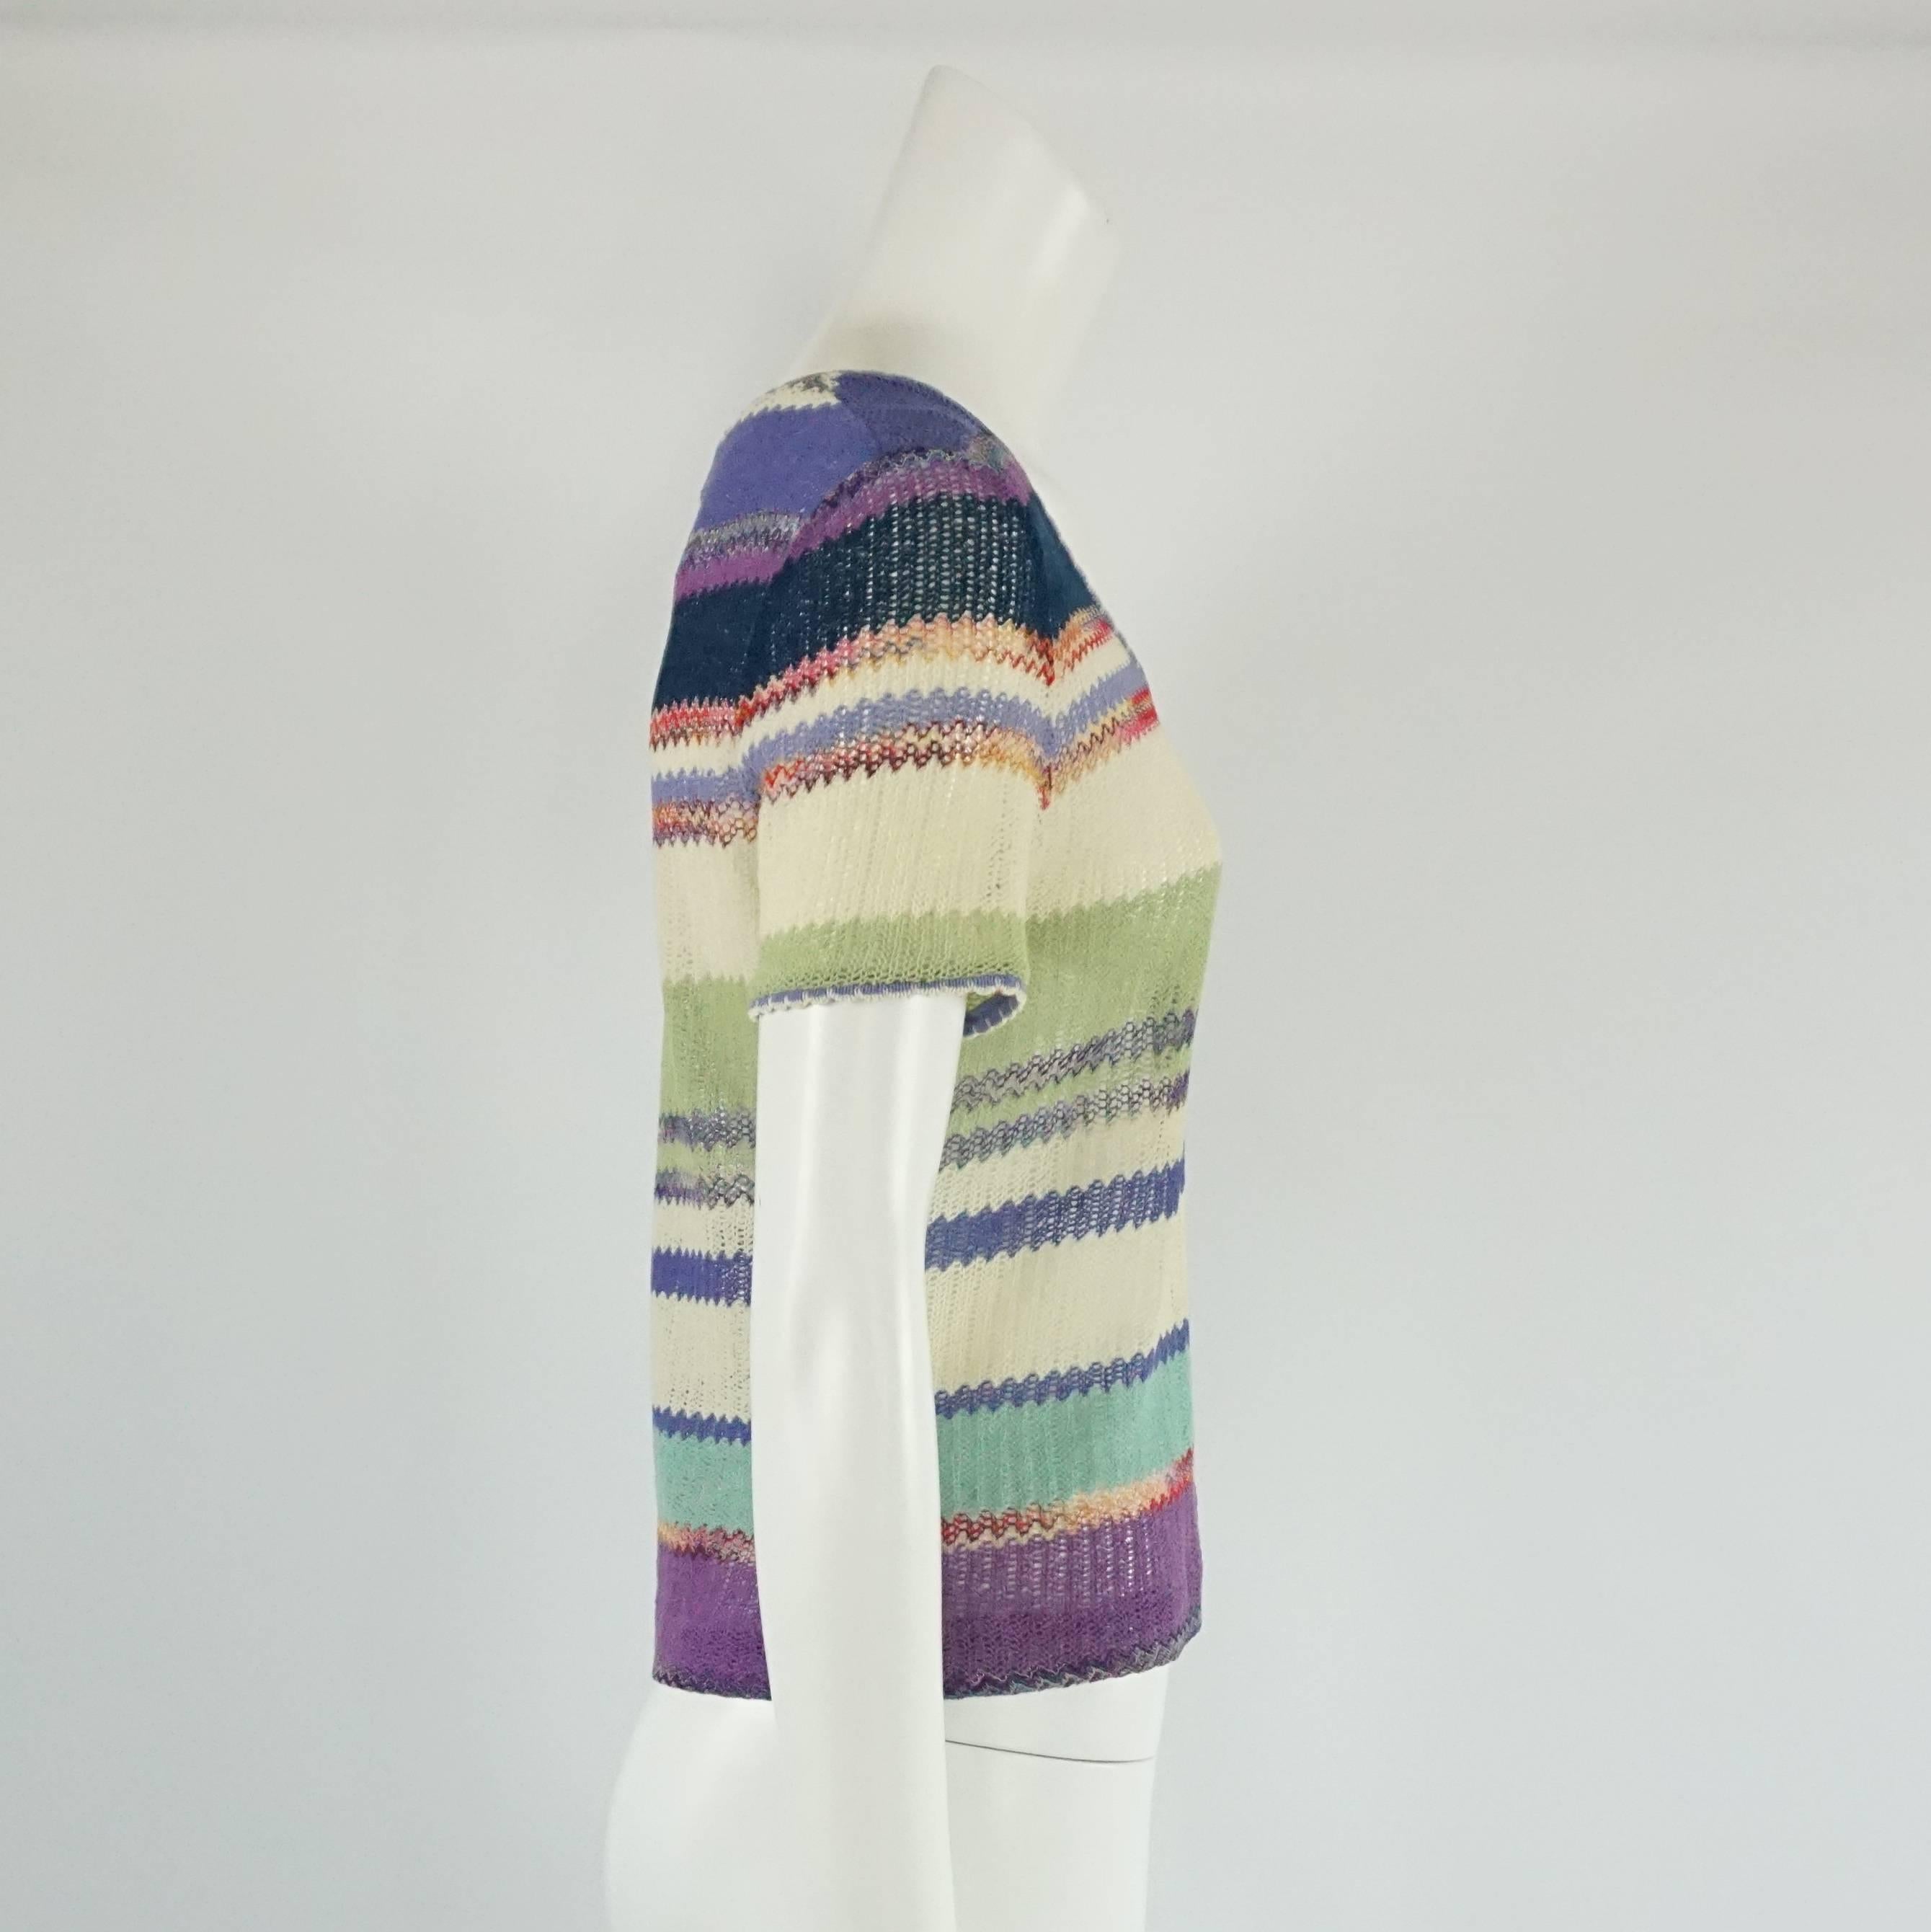 This Missoni knitted top has a variety of colors including ivory, green, blues, purples, and red. The top is short sleeved with a round neck and sheer fabric. The piece is in good condition with minimal general wear and a couple small blemishes to